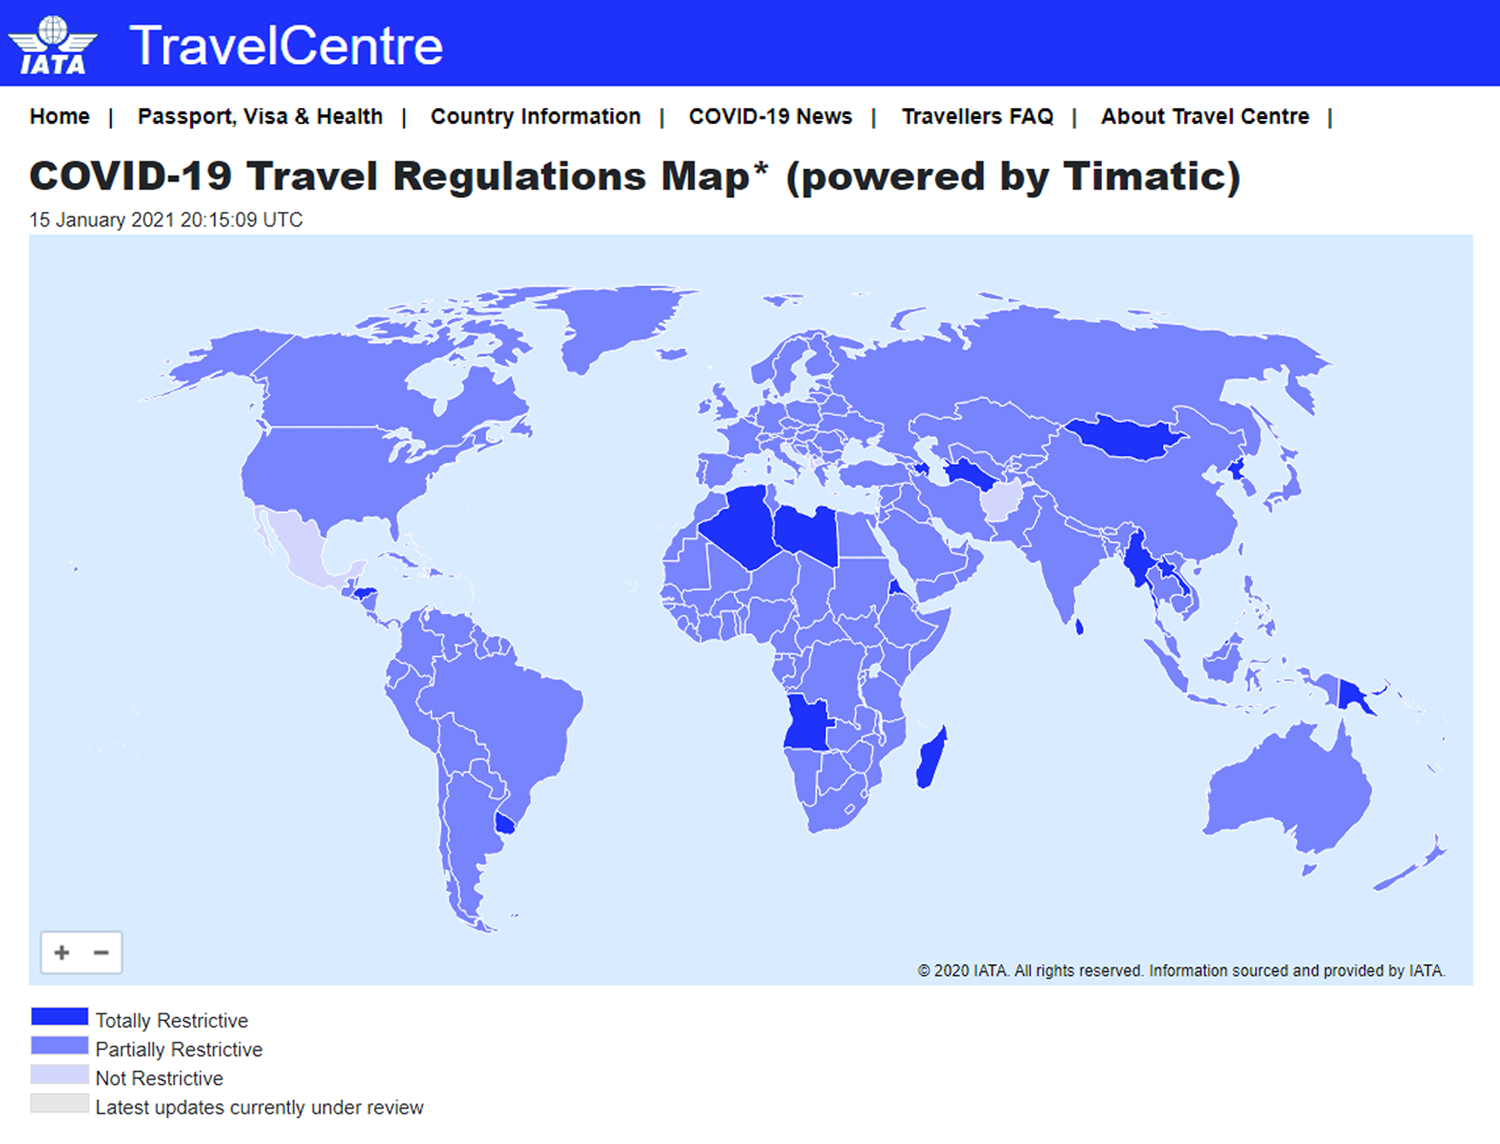 Stay Up to Date with the Latest COVID19 Travel Restrictions